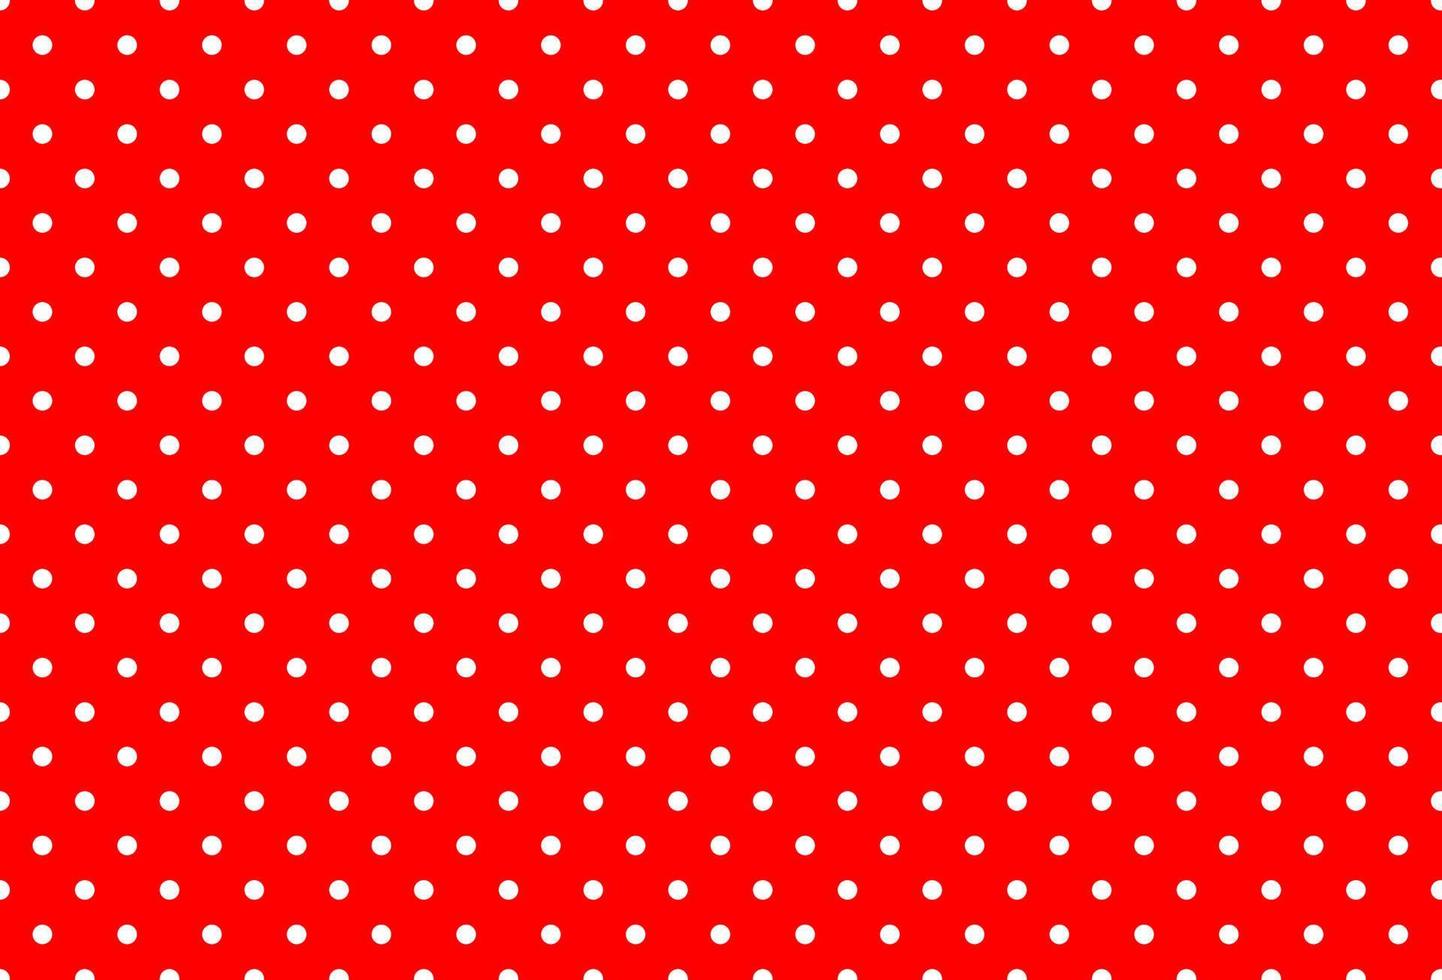 White and red polka dot pattern vector background